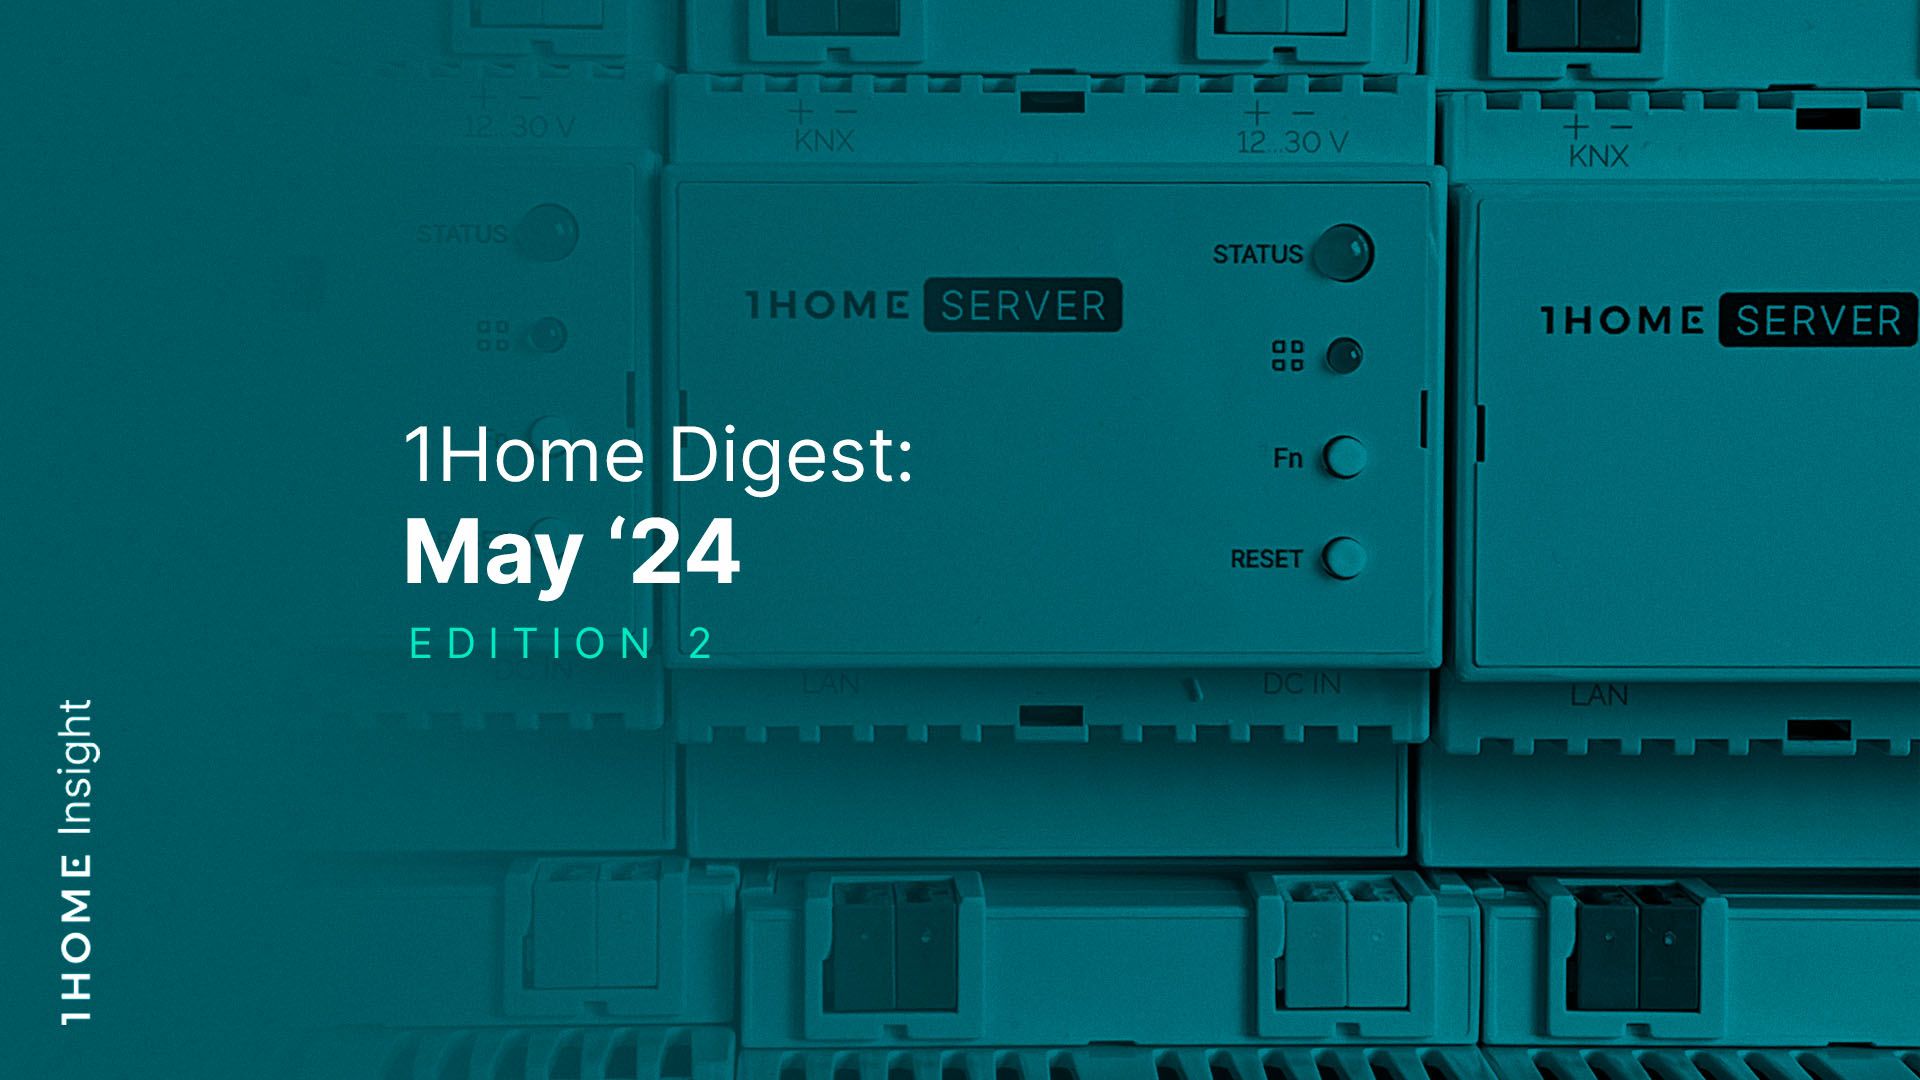 1Home Digest: May '24 Edition 2